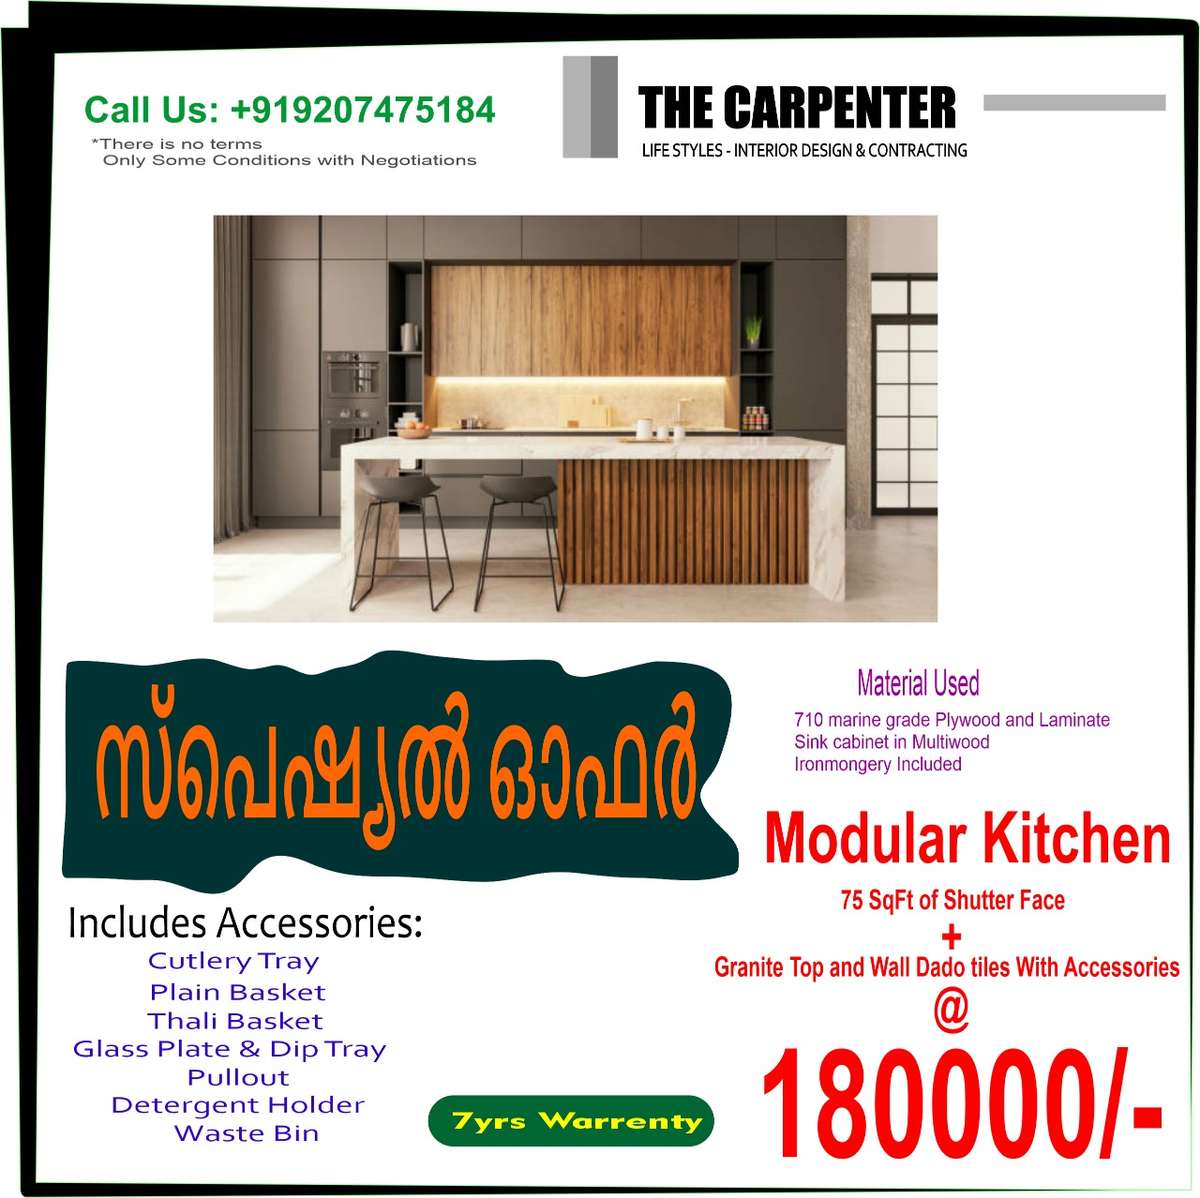 Designs by Contractor The Carpenter Lifestyles, Ernakulam | Kolo